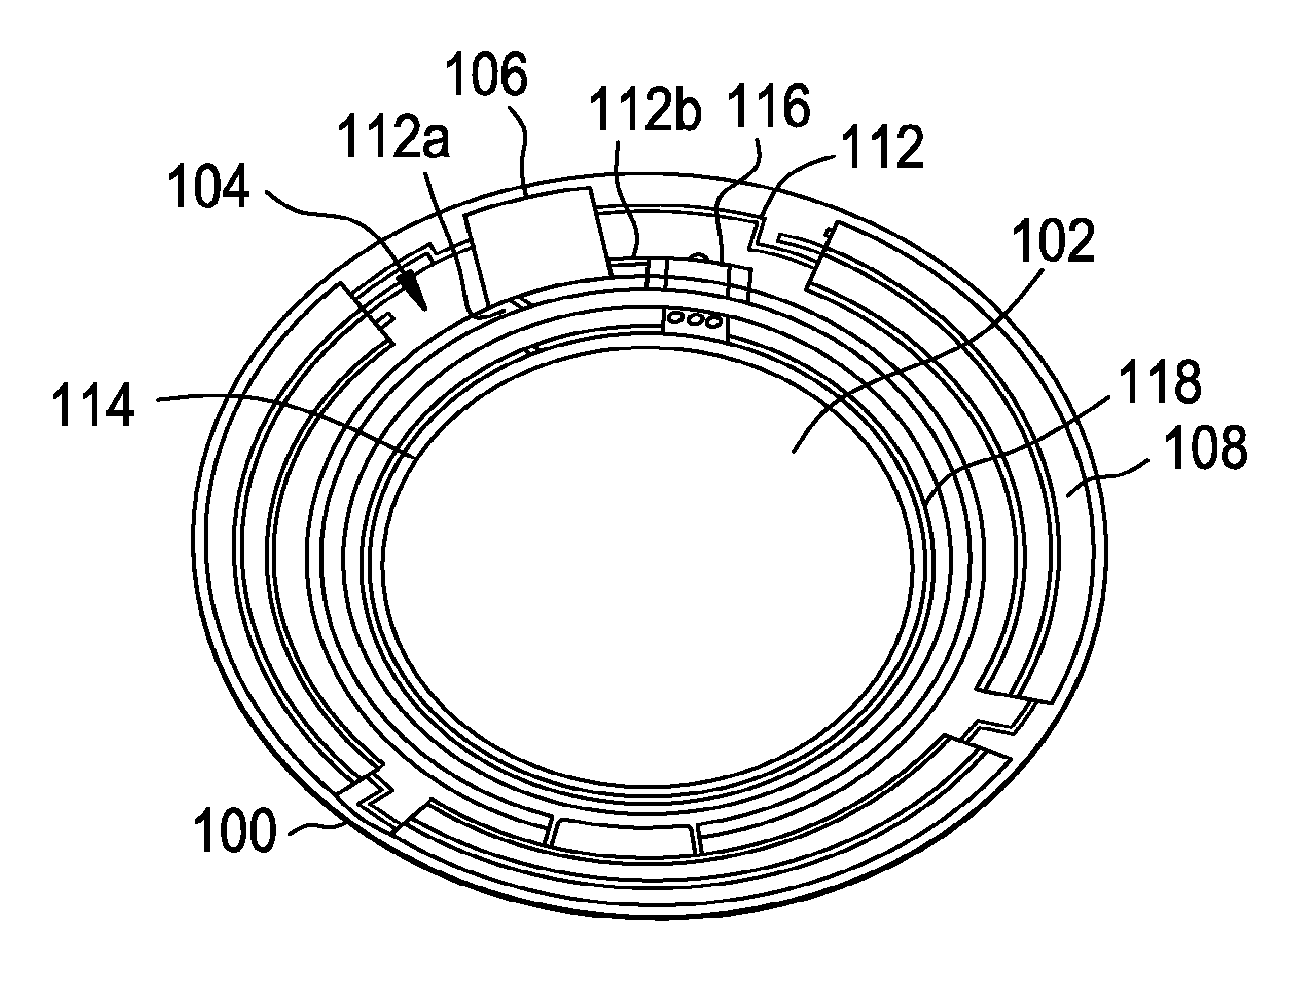 Electrical interconnects in an electronic contact lens